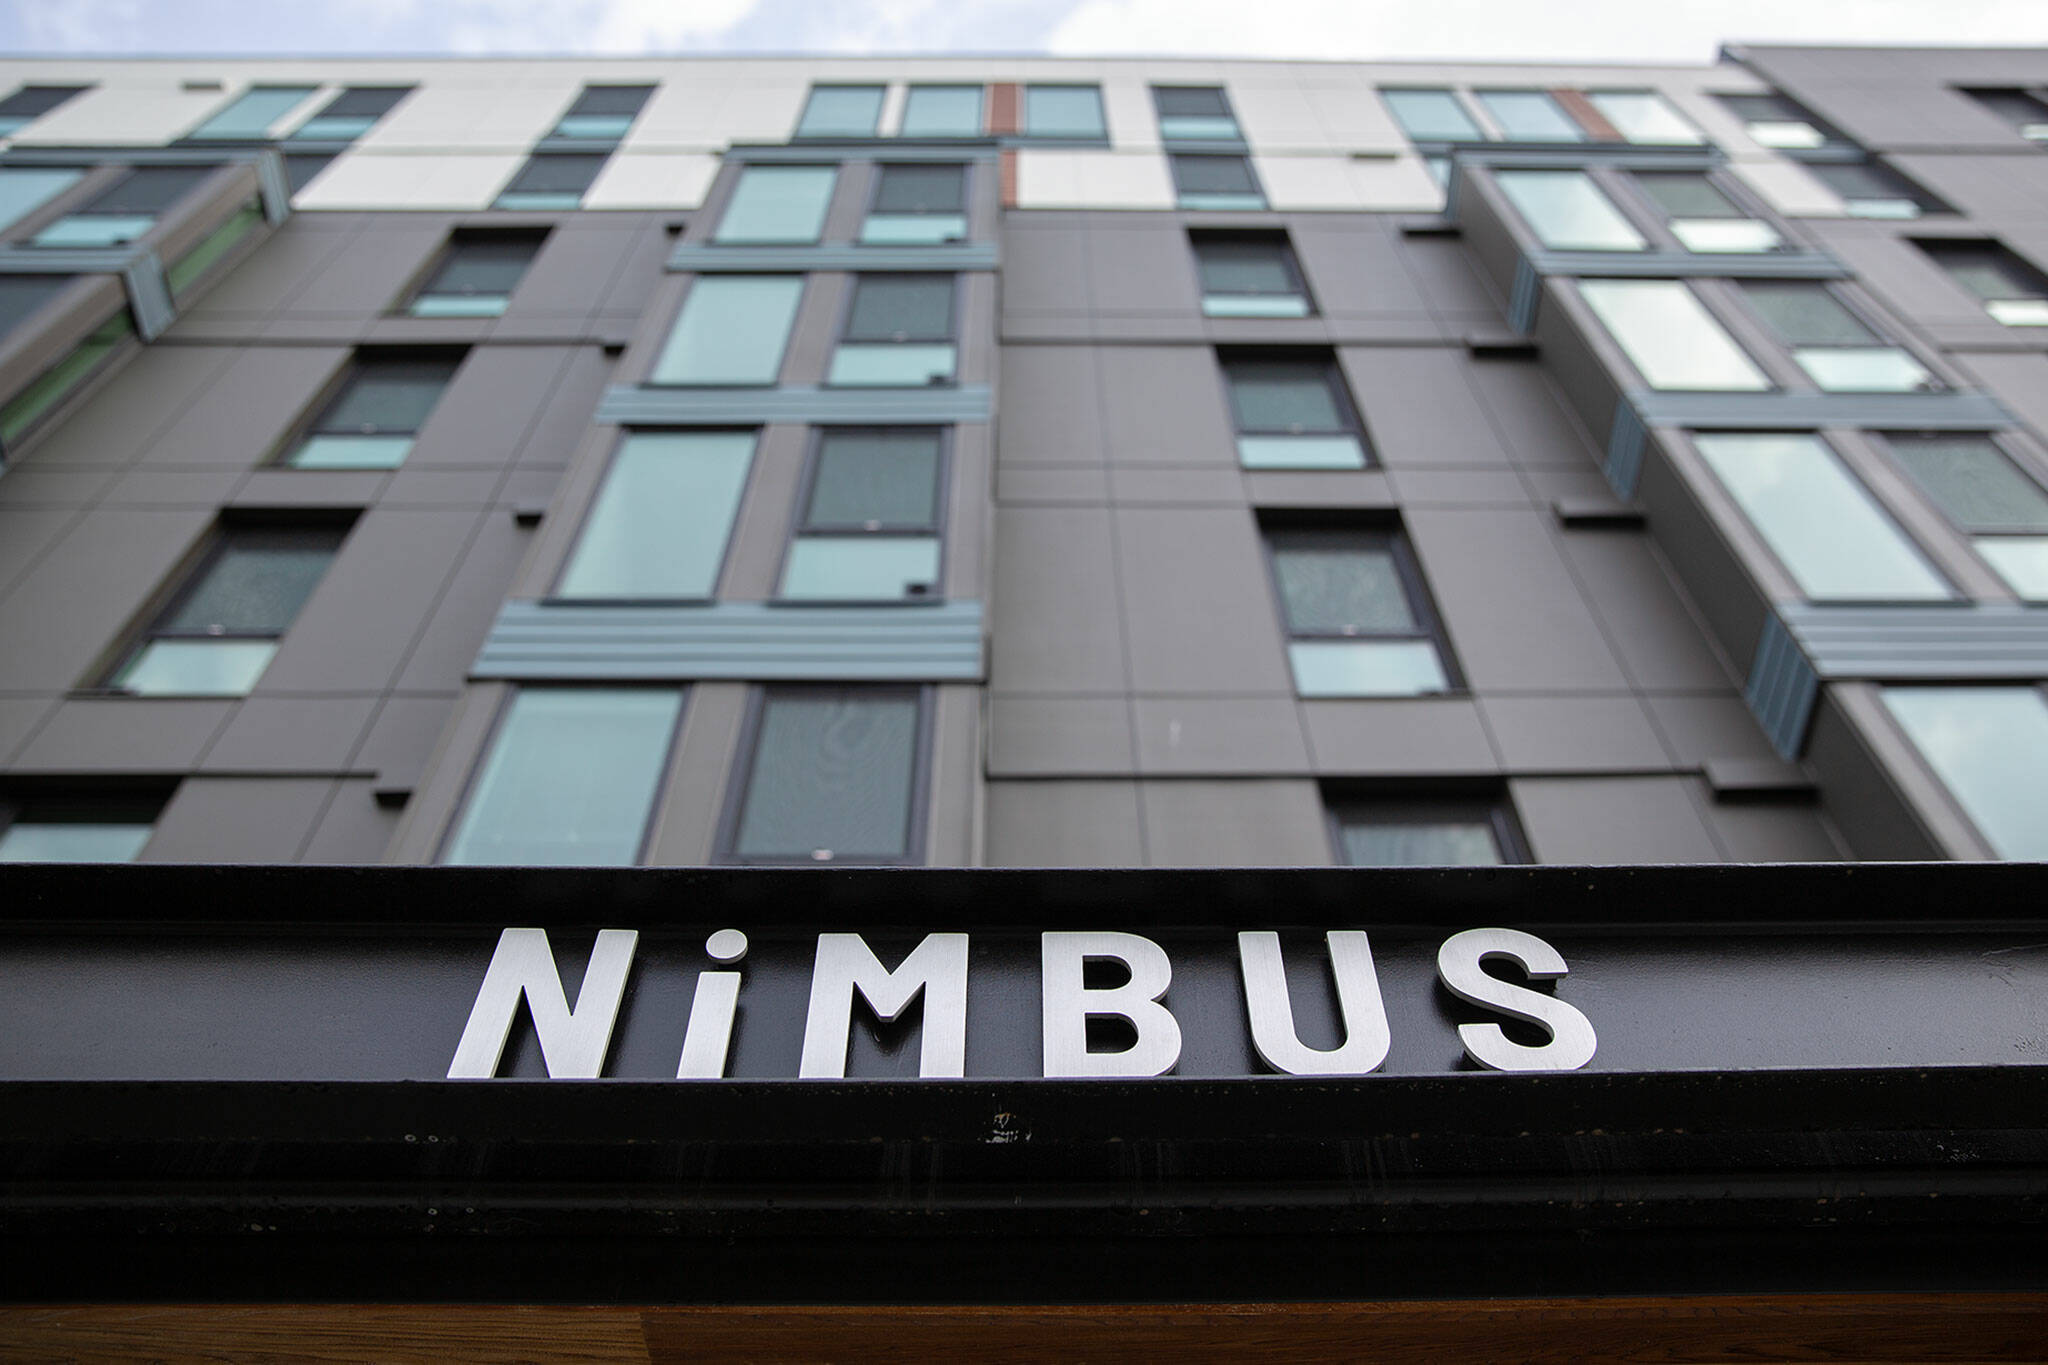 The Nimbus Apartments tower nine stories into the sky in downtown Everett. (Ryan Berry / The Herald)